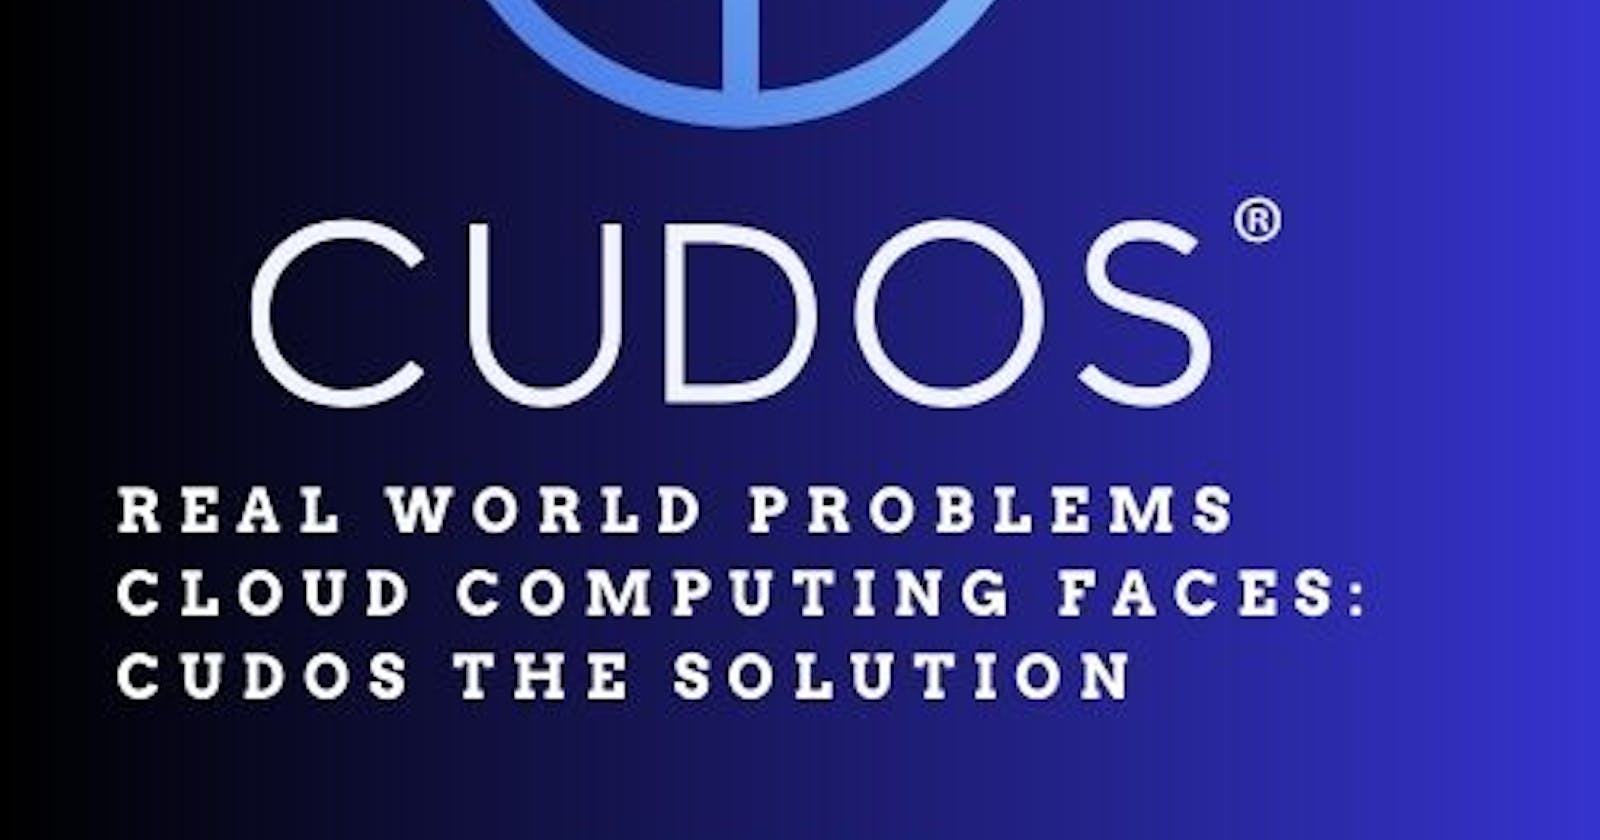 Real world problems facing cloud computing  ; CUDOS THE SOLUTION